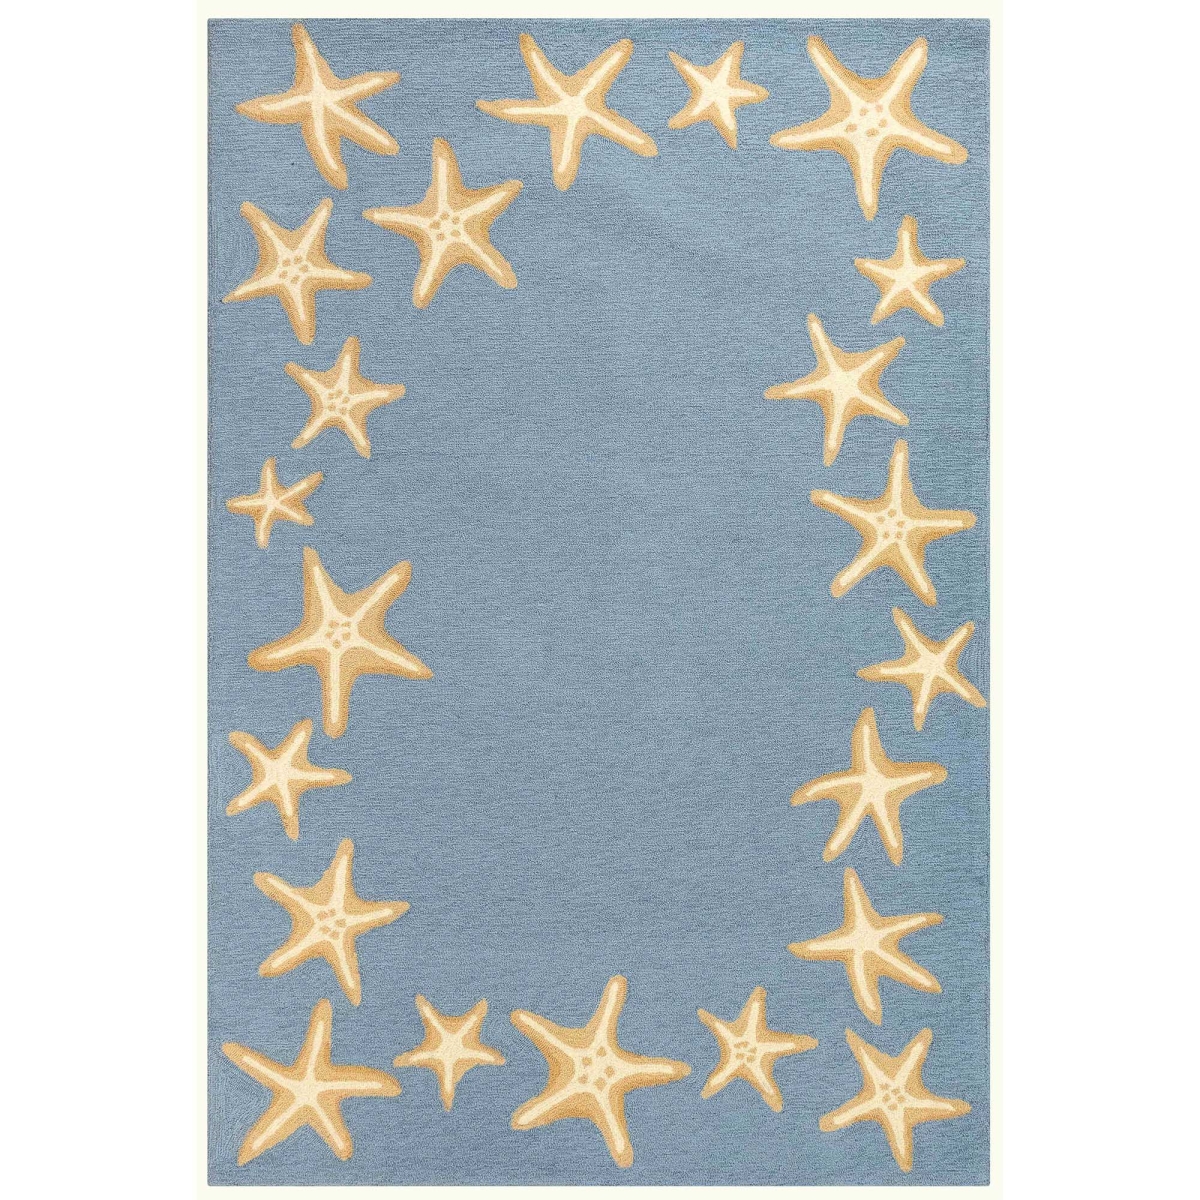 Trans-ocean Imports Cap71171003 7 Ft. 6 In. X 9 Ft. 6 In. Liora Manne Capri Starfish Border Indoor & Outdoor Hand Tufted Rectangle Rug - Bluewater